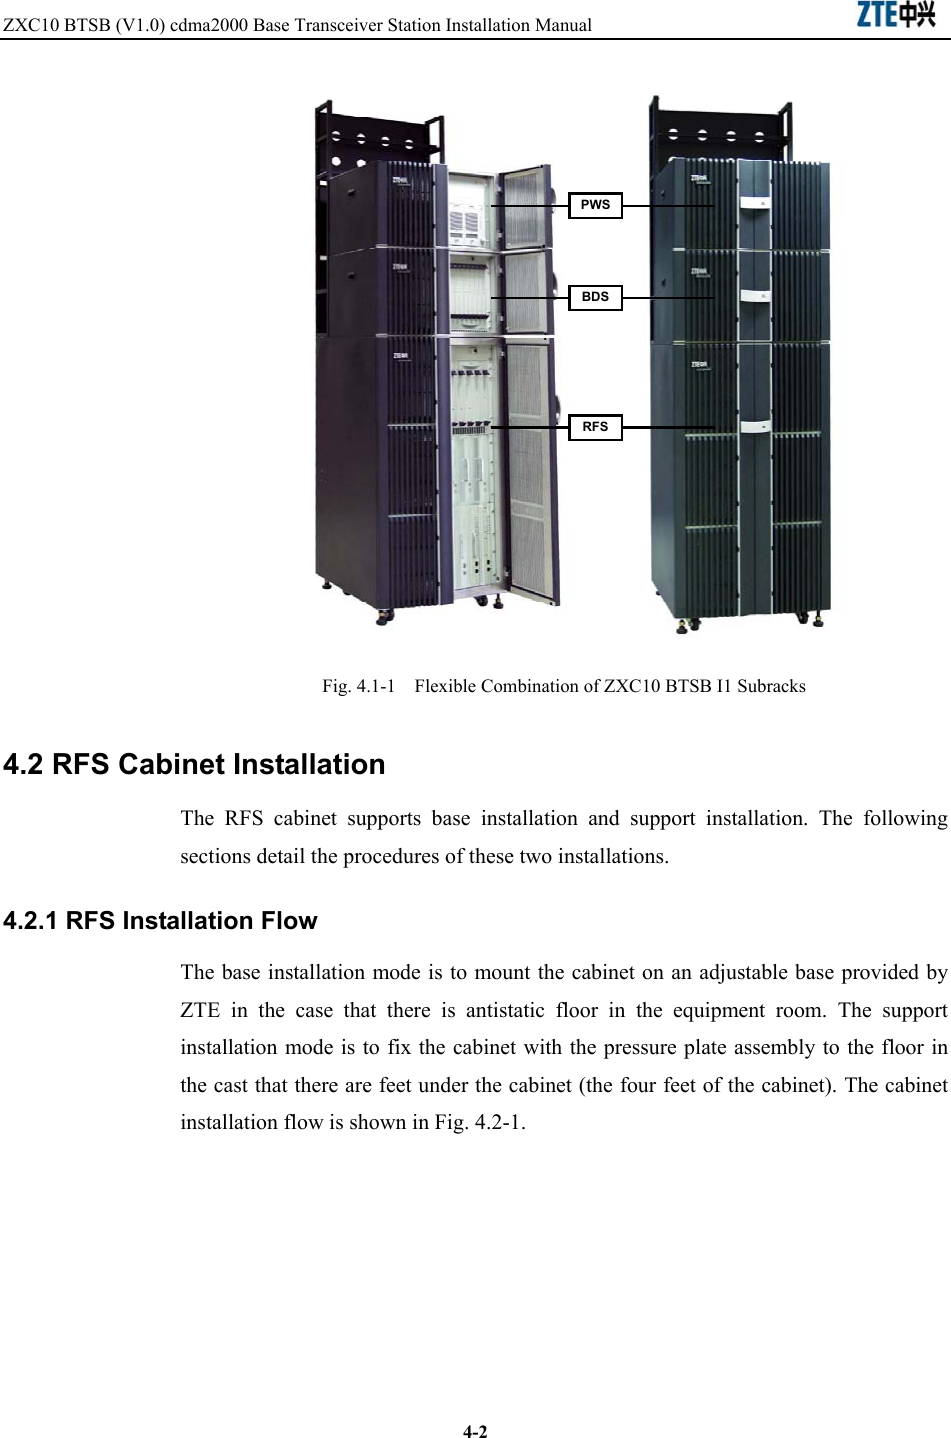 ZXC10 BTSB (V1.0) cdma2000 Base Transceiver Station Installation Manual                               4-2PWSBDSRFS Fig. 4.1-1    Flexible Combination of ZXC10 BTSB I1 Subracks   4.2 RFS Cabinet Installation The RFS cabinet supports base installation and support installation. The following sections detail the procedures of these two installations.   4.2.1 RFS Installation Flow The base installation mode is to mount the cabinet on an adjustable base provided by ZTE in the case that there is antistatic floor in the equipment room. The support installation mode is to fix the cabinet with the pressure plate assembly to the floor in the cast that there are feet under the cabinet (the four feet of the cabinet). The cabinet installation flow is shown in Fig. 4.2-1. 